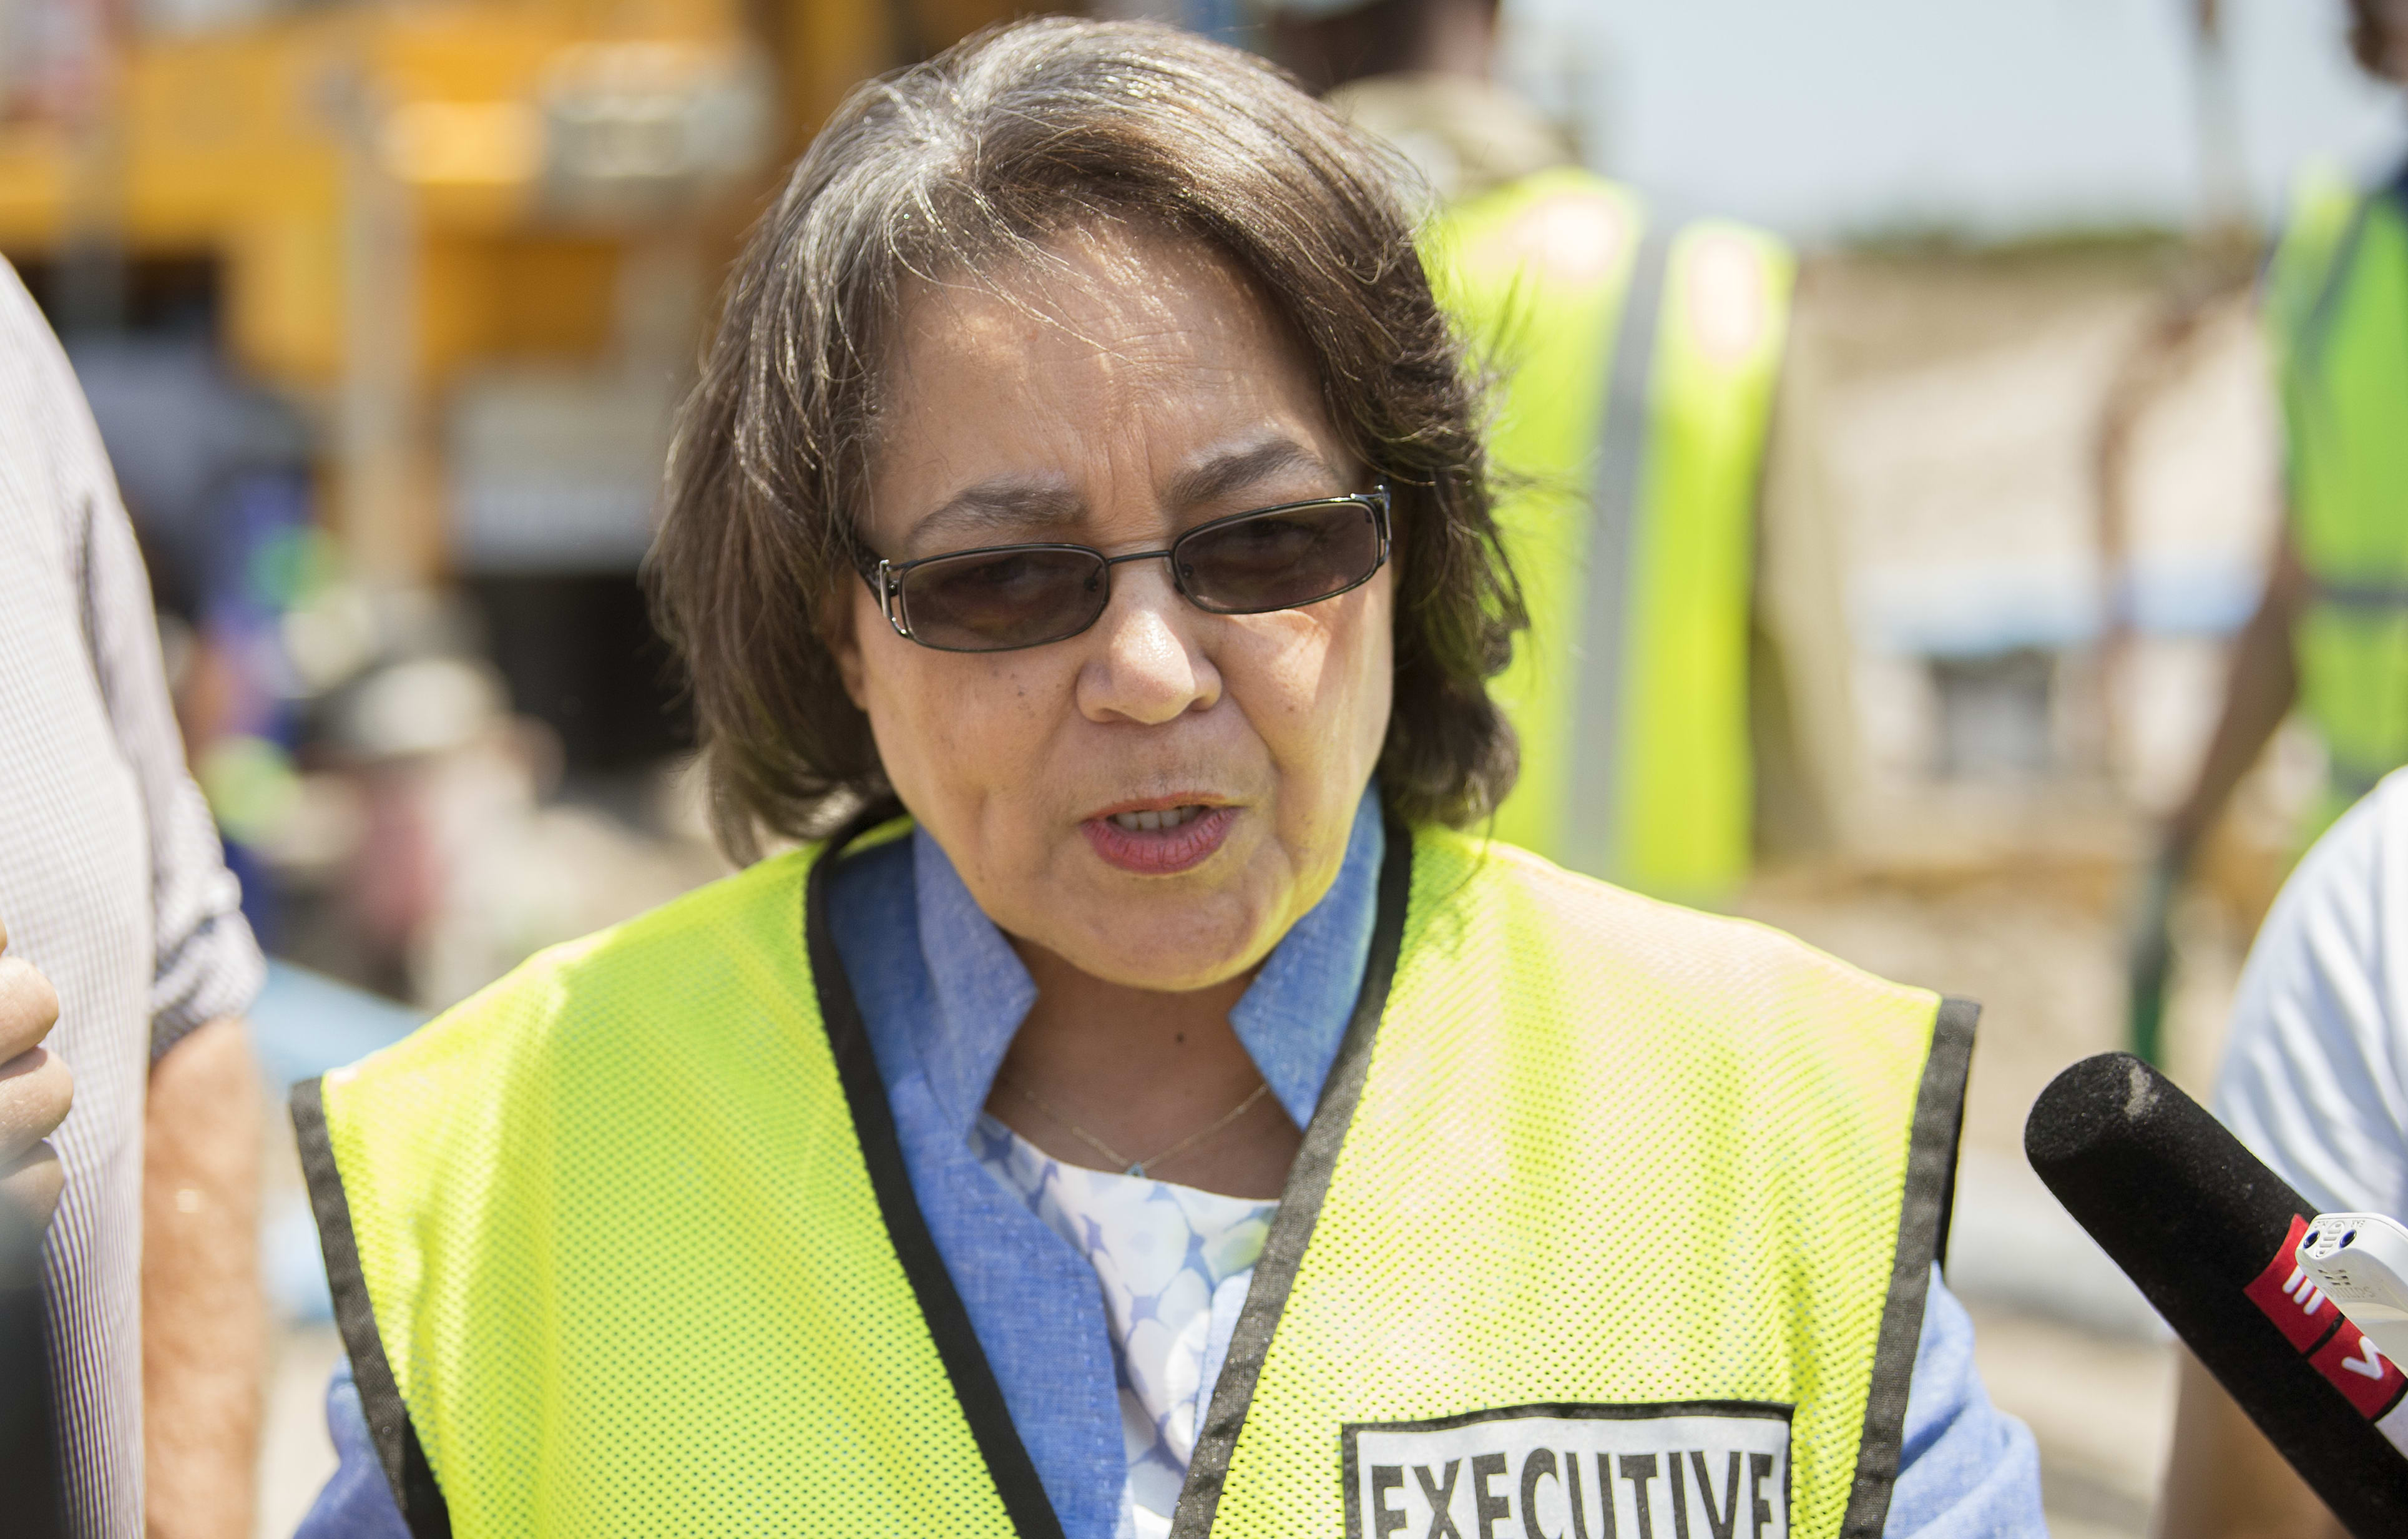 Cape Town City Mayor Patricia de Lille talks to media at a site where the city council has ordered drilling into an aquifer.